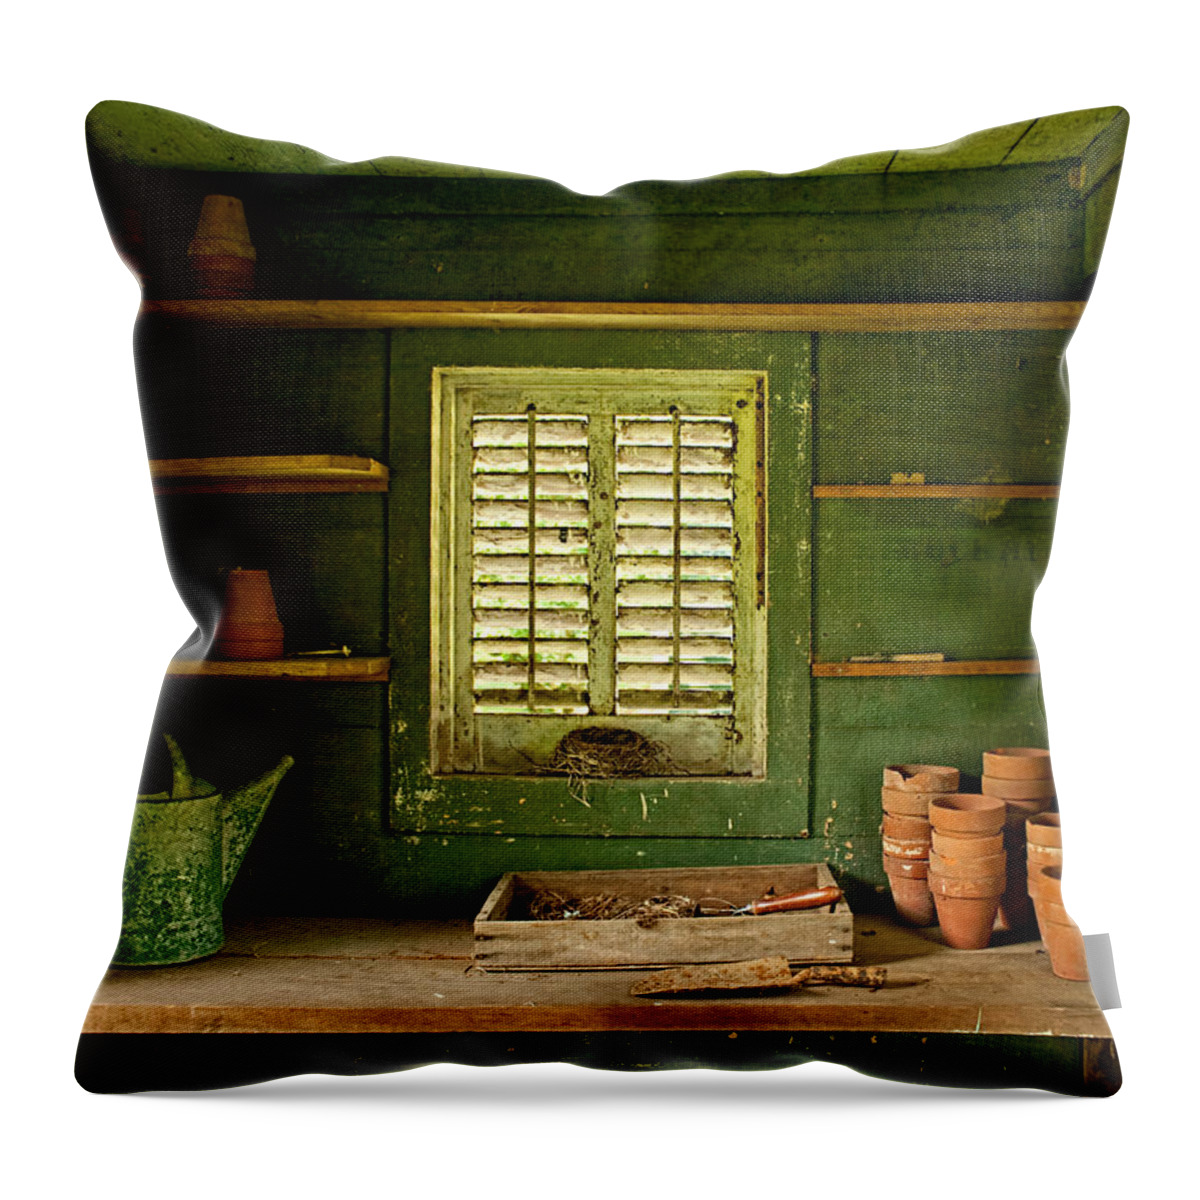 Garden Throw Pillow featuring the photograph The Gardener's Shed by Kristia Adams